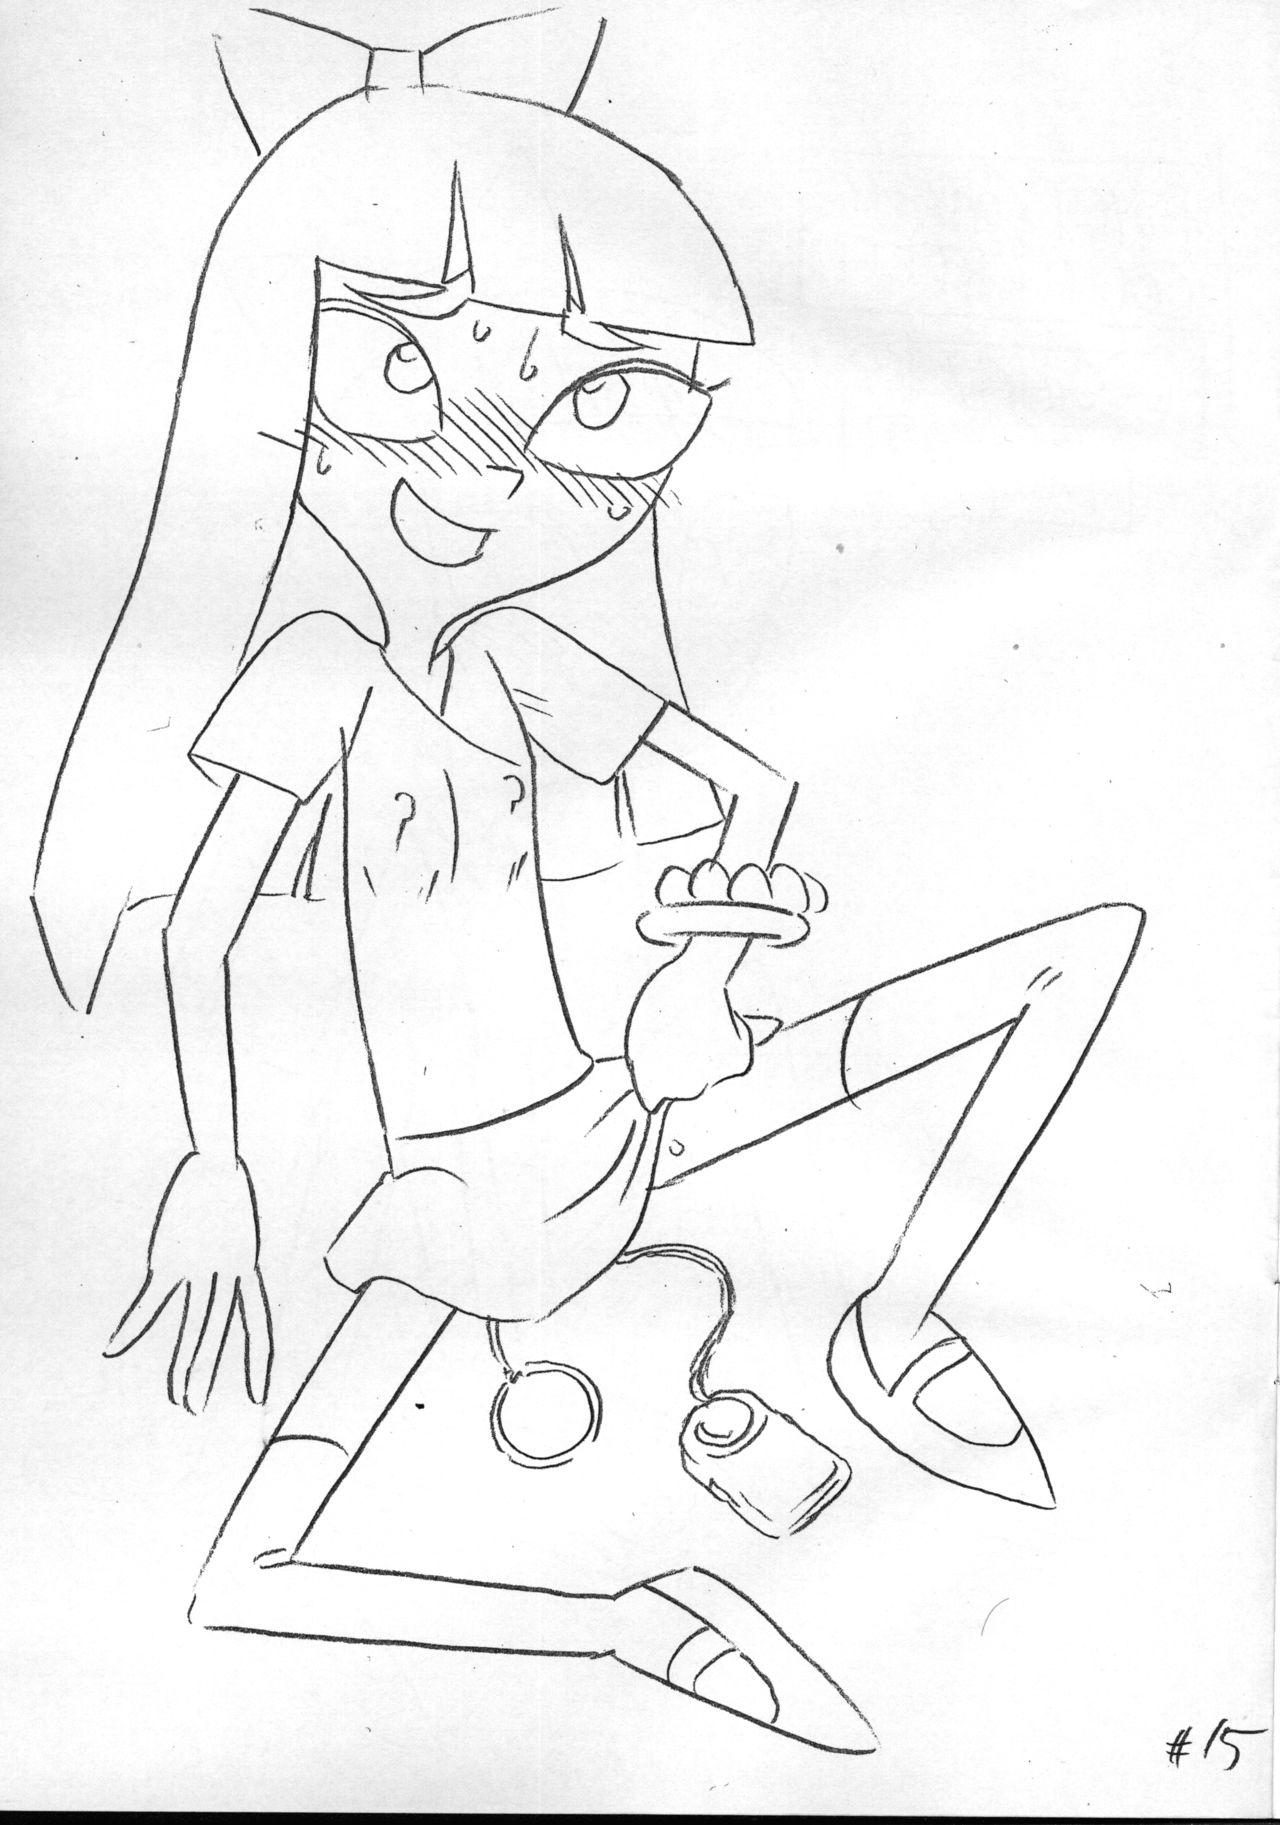 Teen Fuck Psychosomatic Counterfeit Ex: Stacy in Early Age - Phineas and ferb From - Page 14